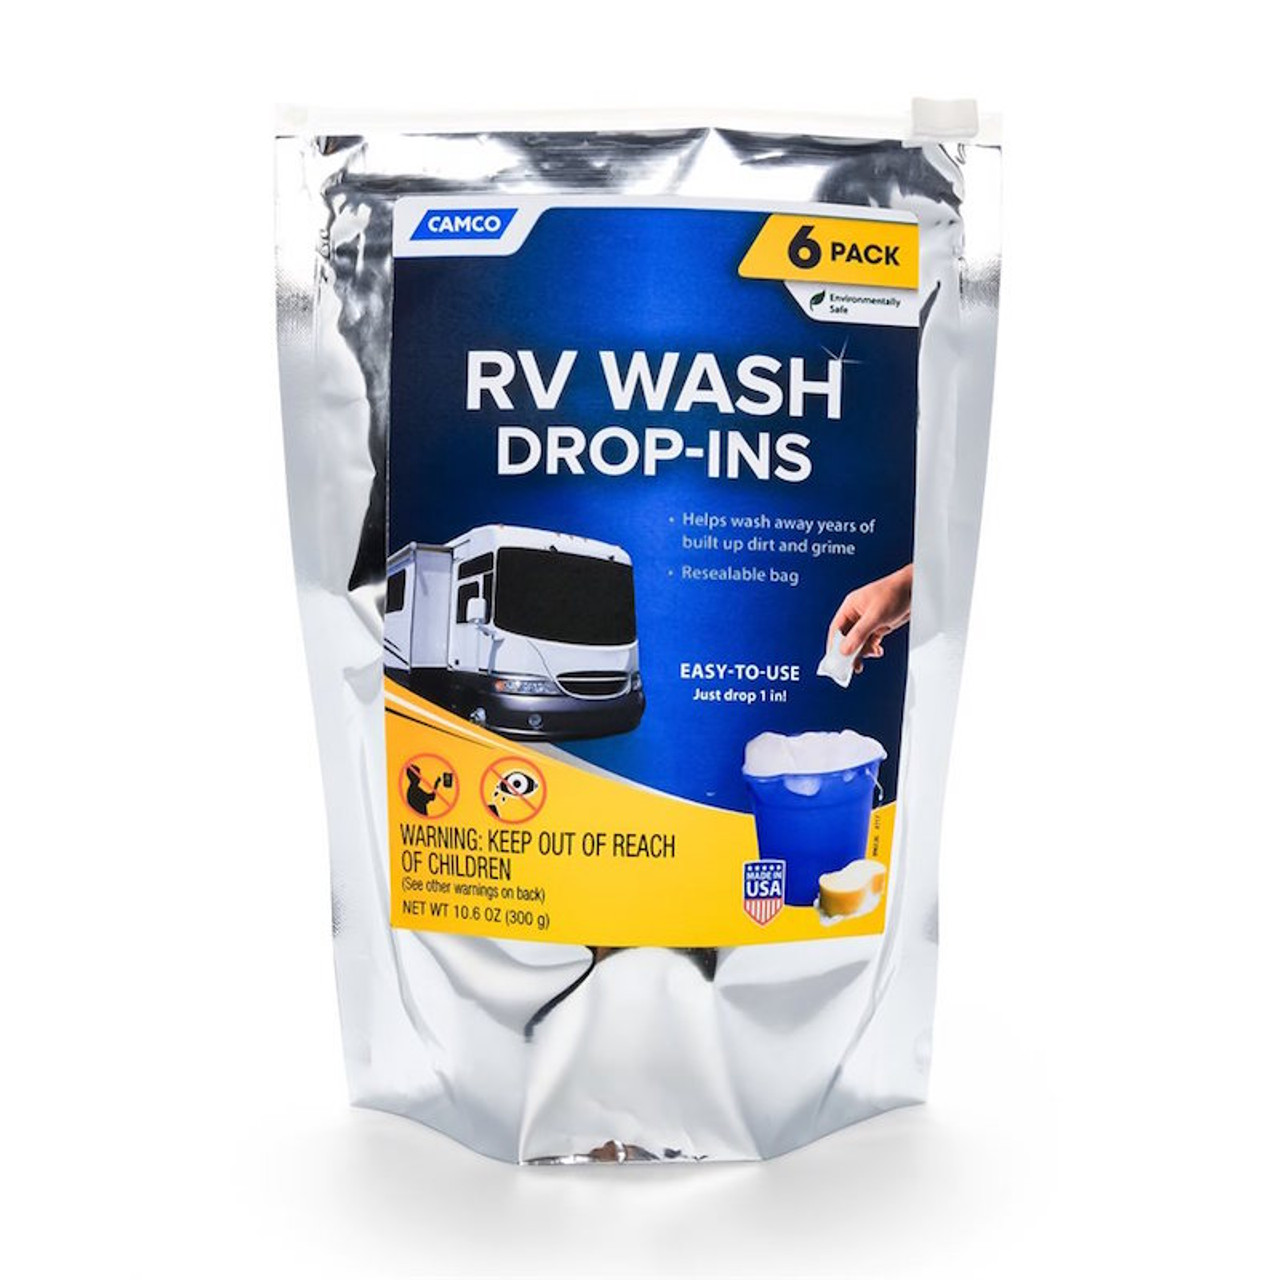 Camco RV Wash Pods - 6 Drop-Ins Per Pack 400-05350